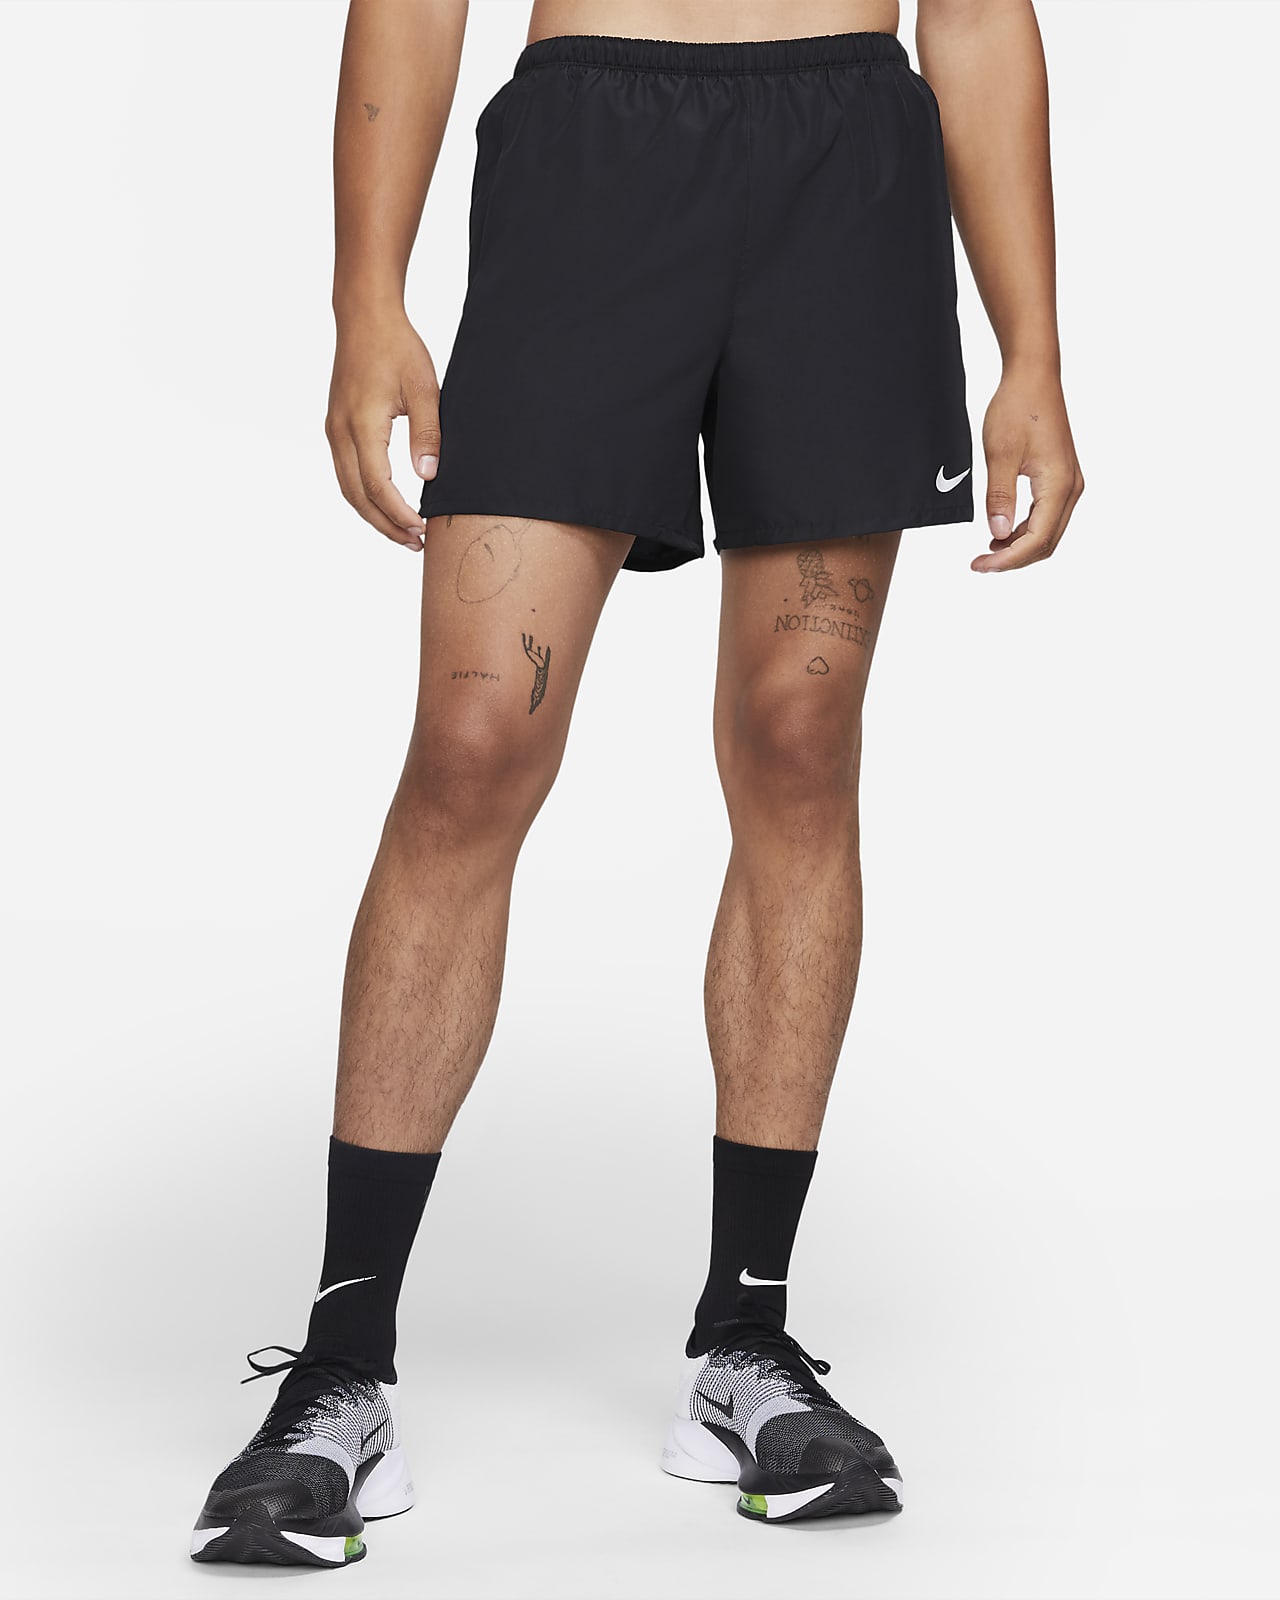 Brief-Lined Running Shorts. Nike 